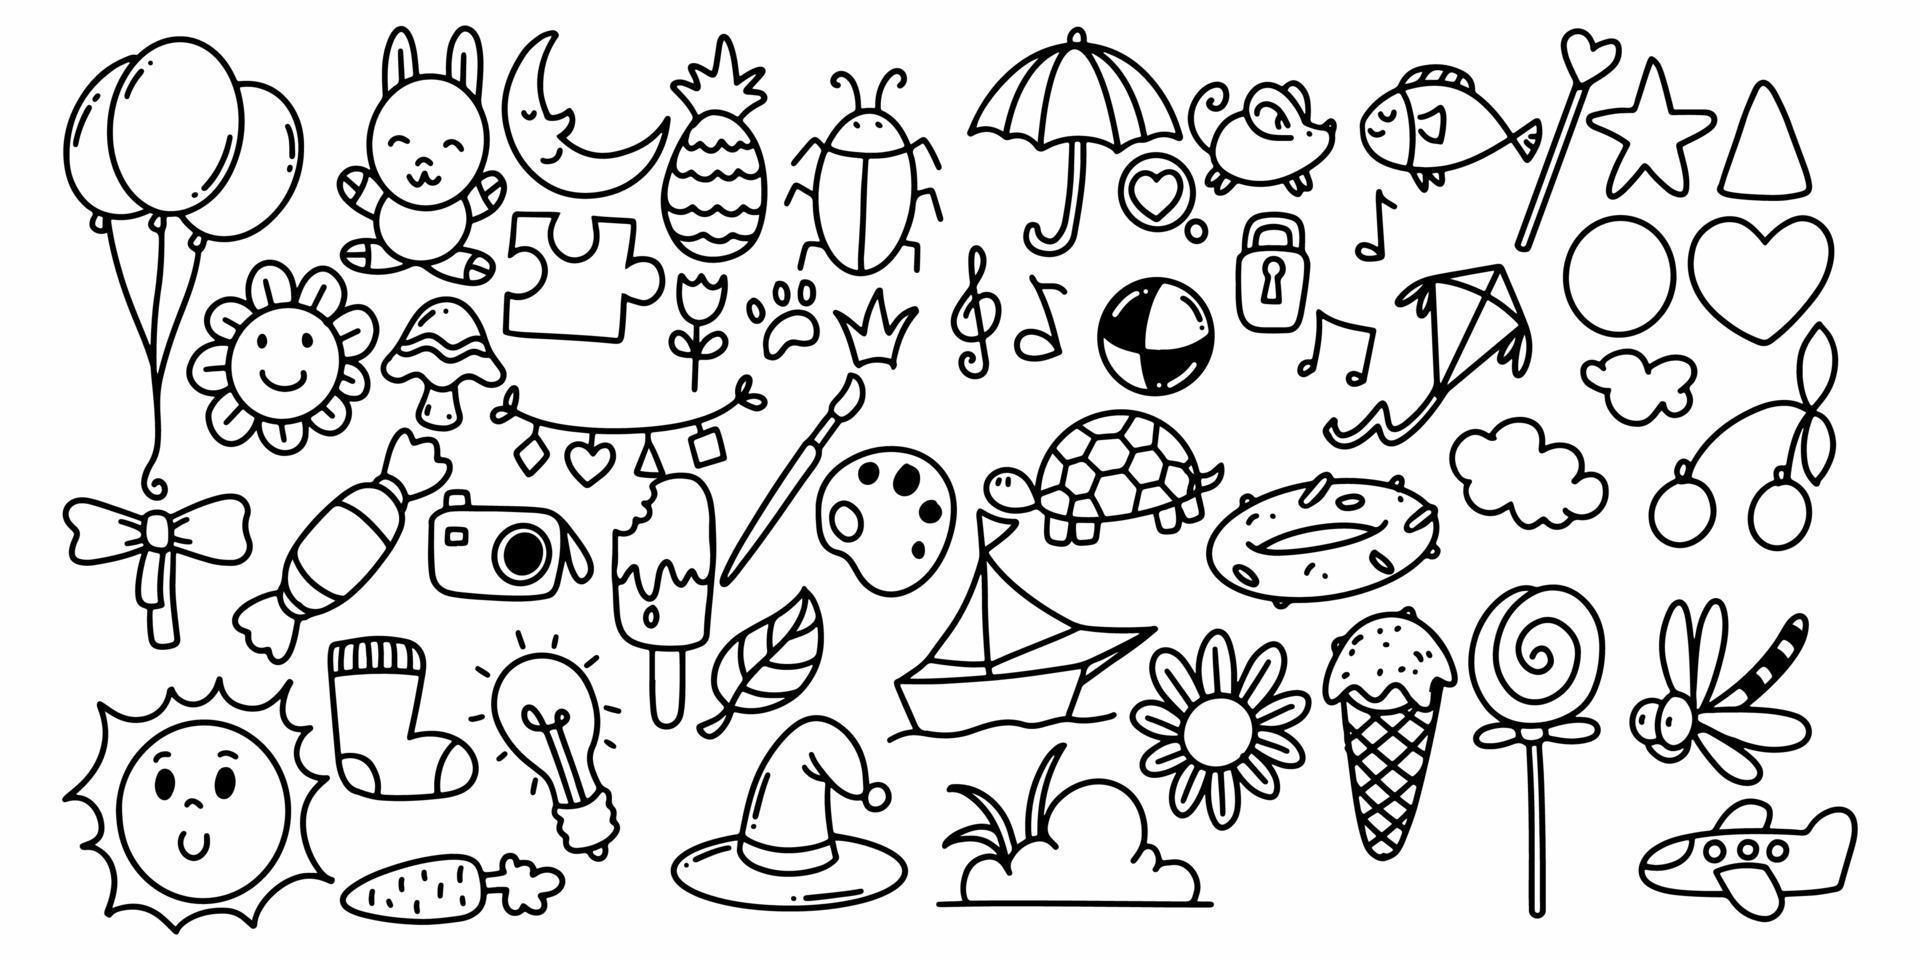 Set of elements in childish doodle hand drawn style vector